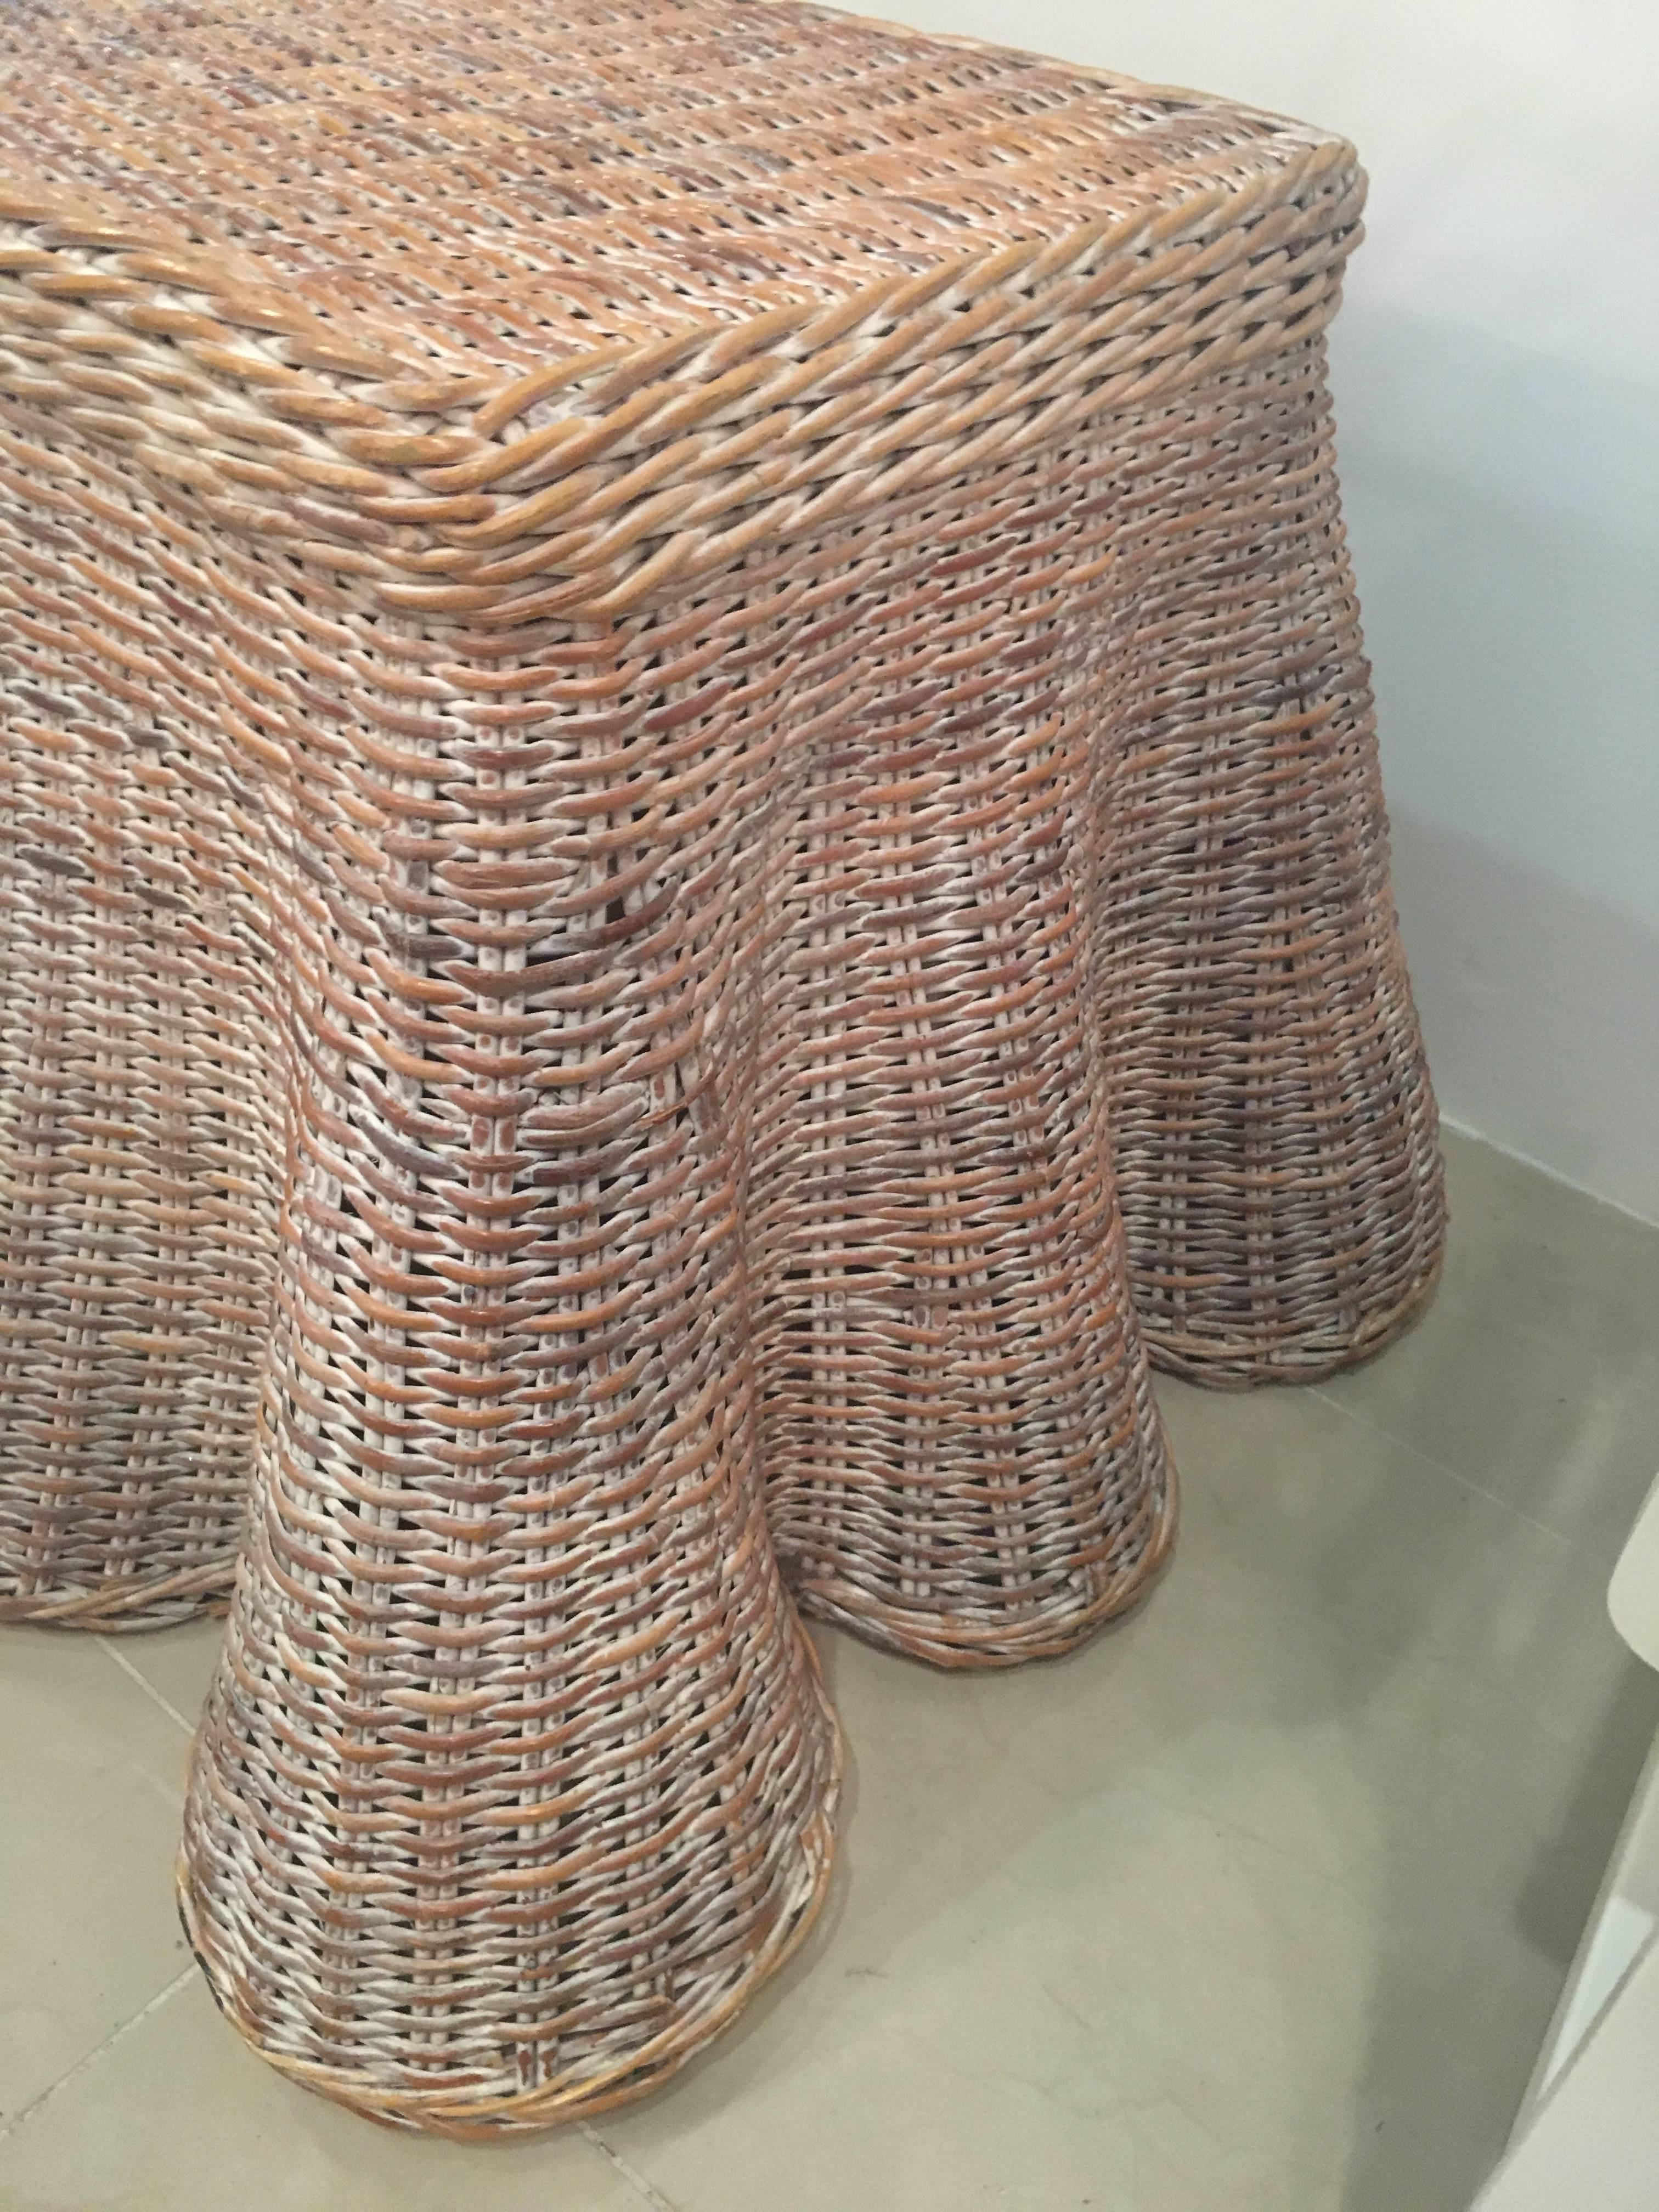 Draped Wicker Coffee, Cocktail or End Table Vintage 1